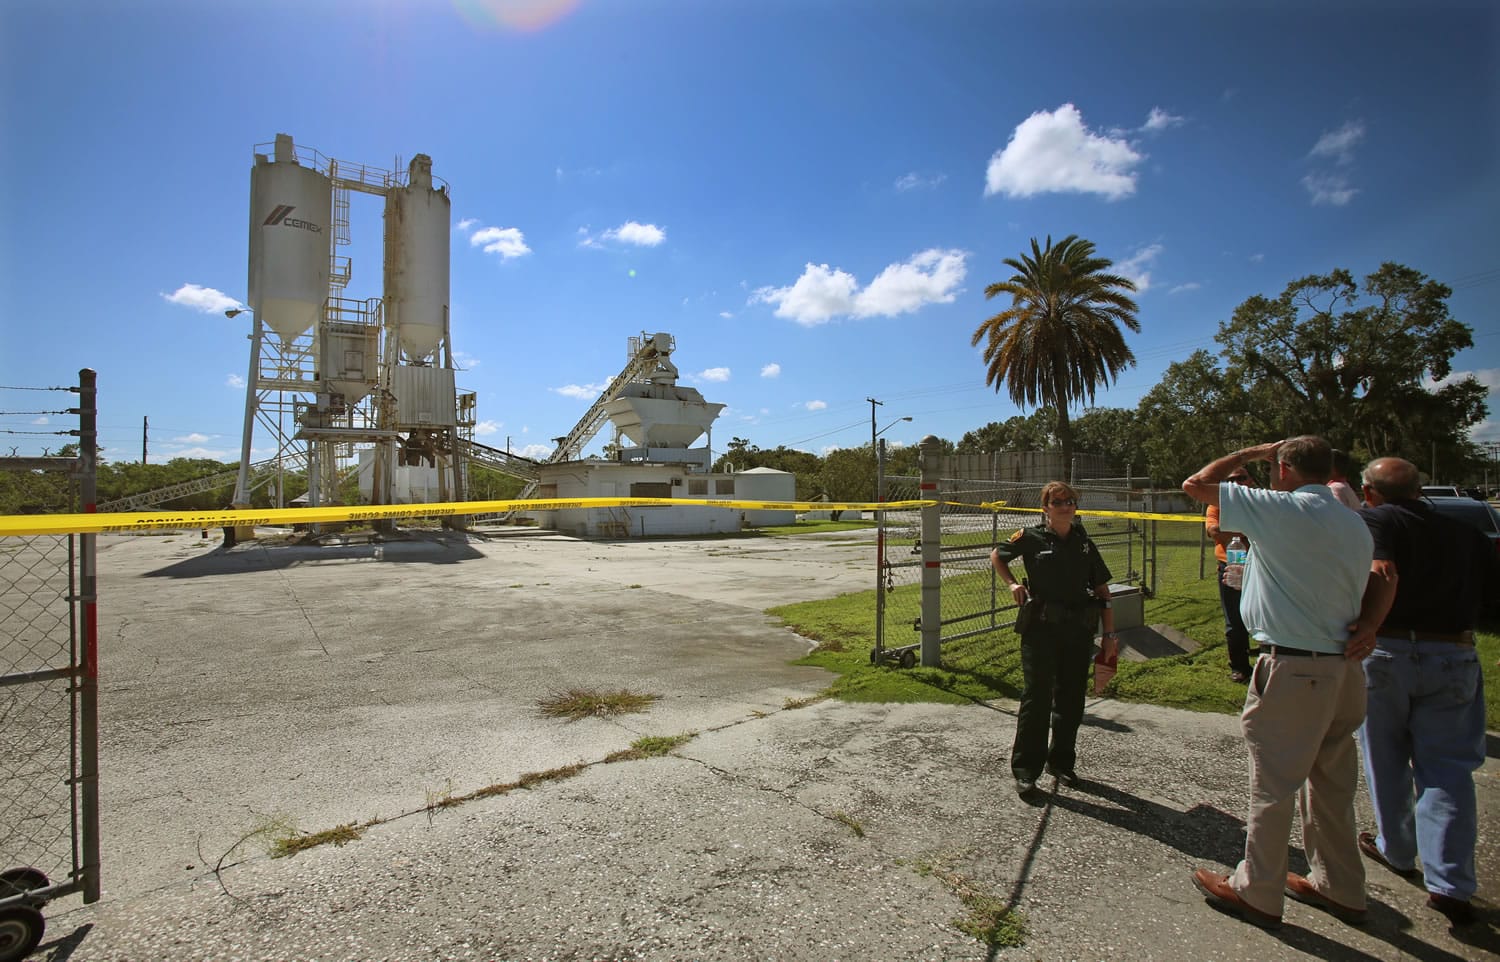 Polk County sheriff personnel investigate the death 12-year-old Rebecca Ann Sedwick on Tuesday at an old cement plant in Lakeland, Fla.